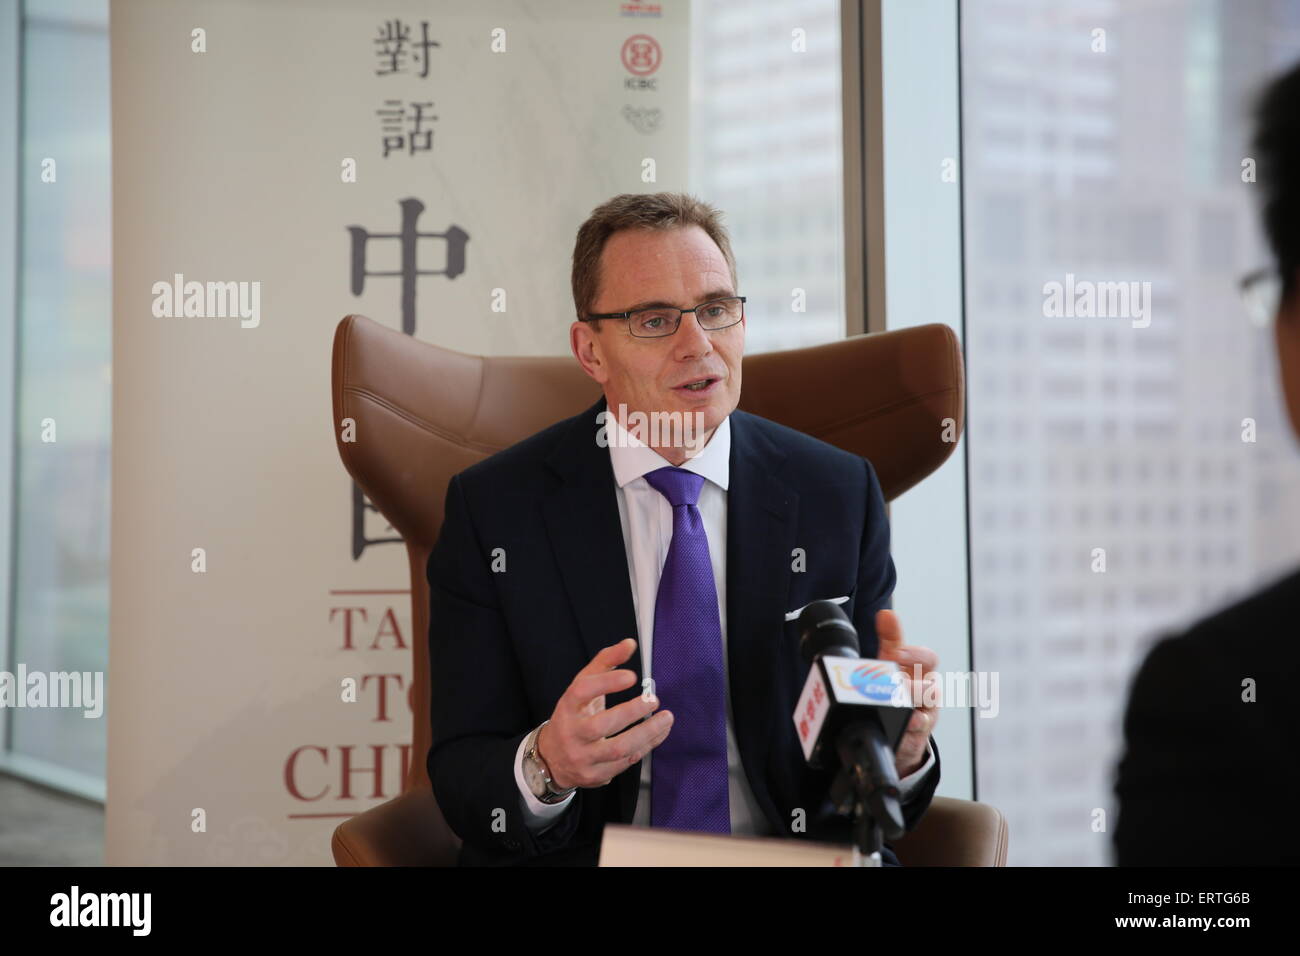 Sydney, Australia. 5th June, 2015. BHP Billiton Chief Executive Andrew Mackenzie receives an interview of China's Xinhua News Agency in Melbourne, Australia, June 5, 2015. BHP Billiton Chief Executive Andrew Mackenzie said on Friday in Melbourne that a number of measures are needed to make much more efficient use of fuels and decarbonize the energy supply. The interview was part of Xinhua's 'Talk To China' series discussions with leaders from various sectors of Australia with an aim to strengthen conversations between the two countries. © Li Bing/Xinhua/Alamy Live News Stock Photo